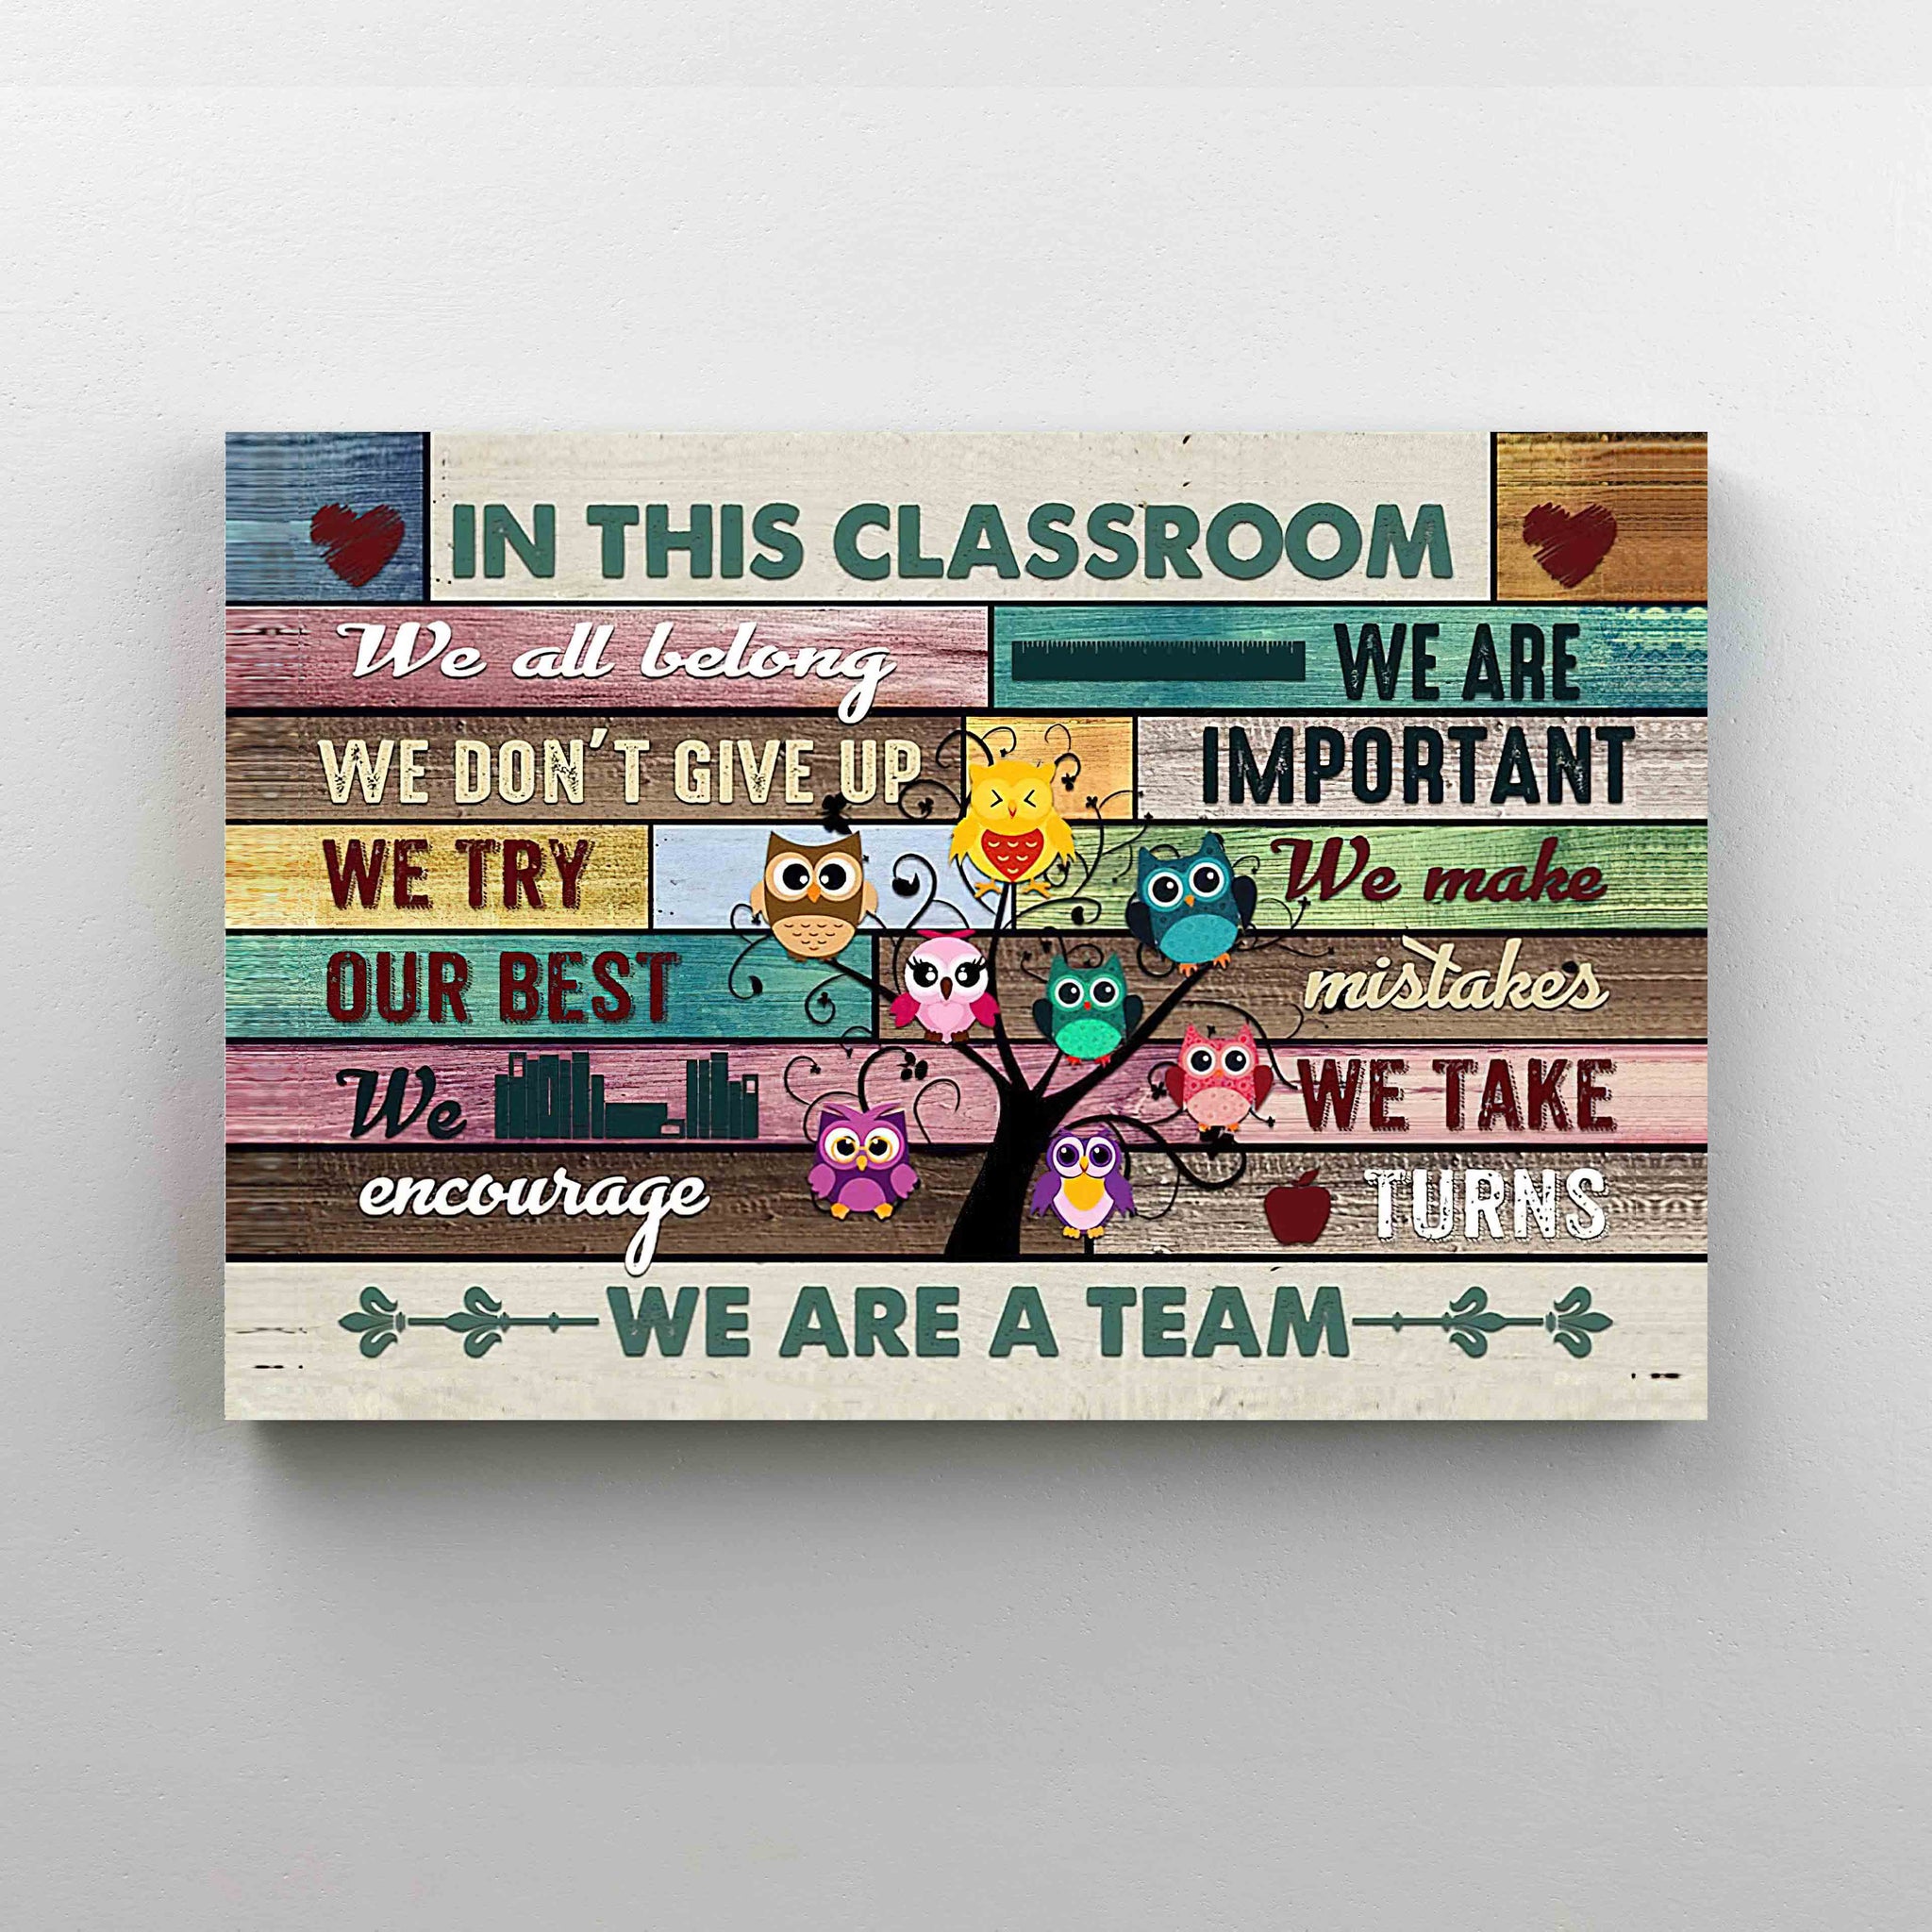 In This Classroom Canvas, We Are A Team Canvas, Classroom Canvas, Wall Art Canvas